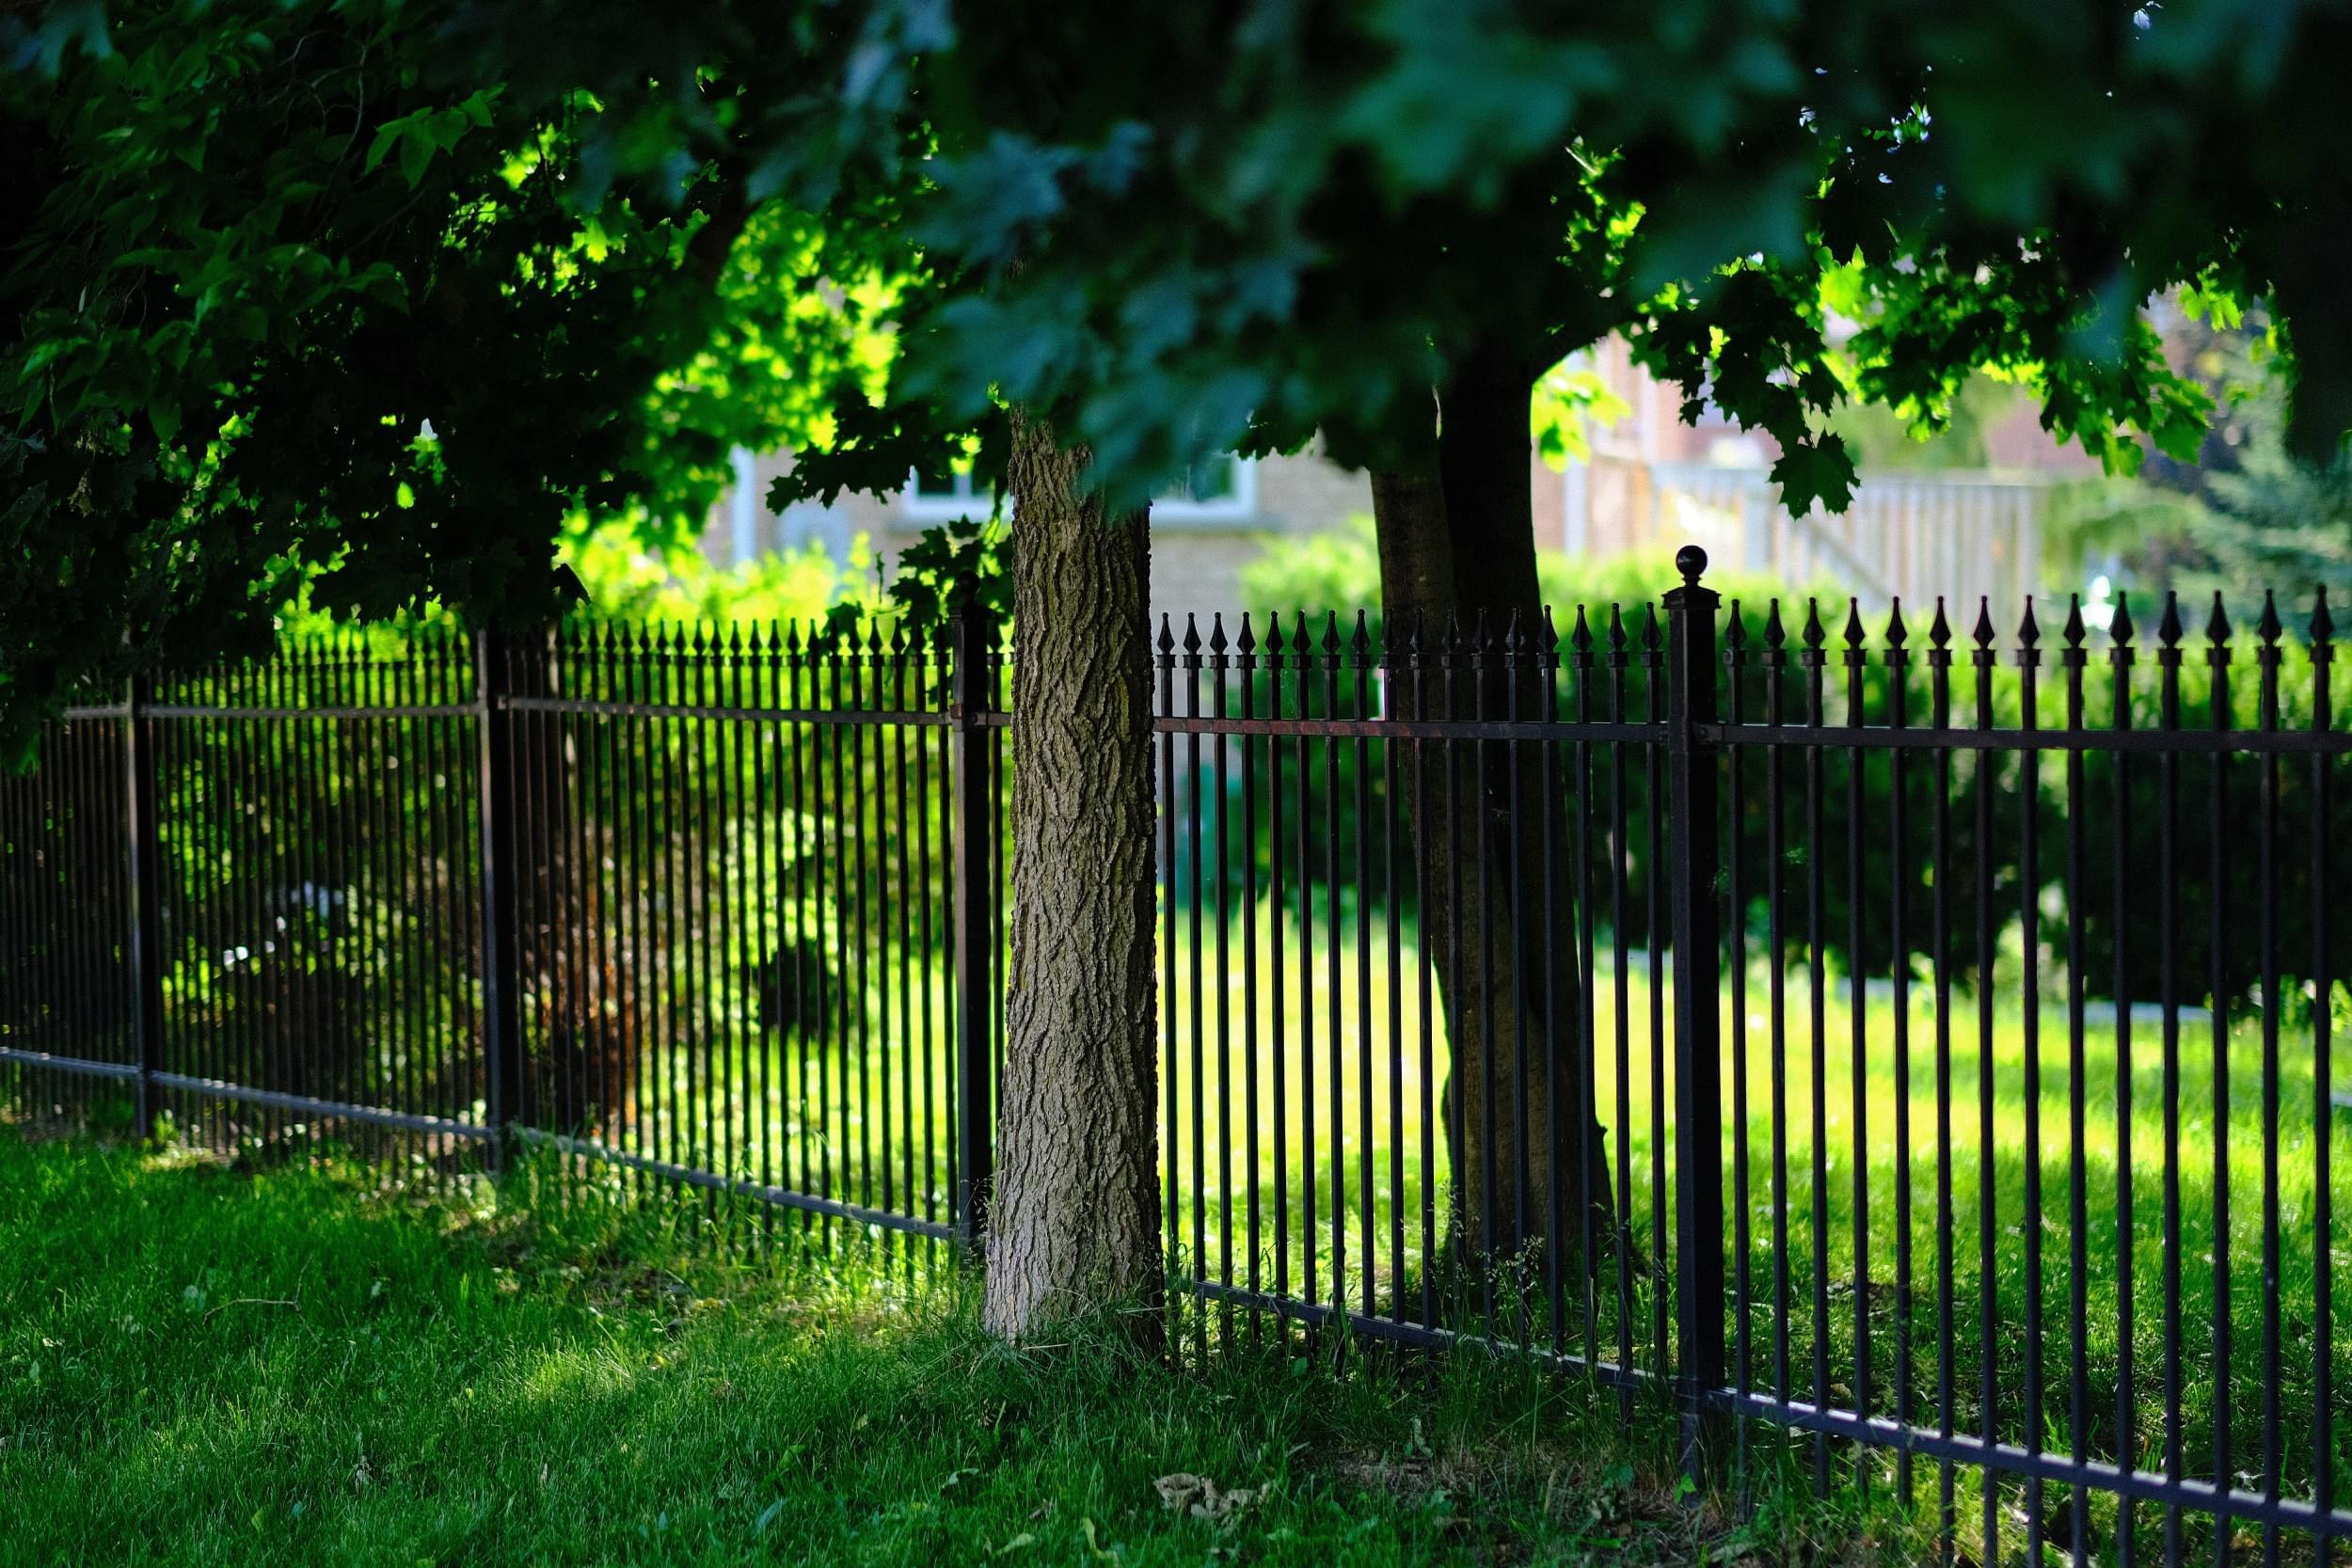 A traditional wrought iron fence with trees and a green yard